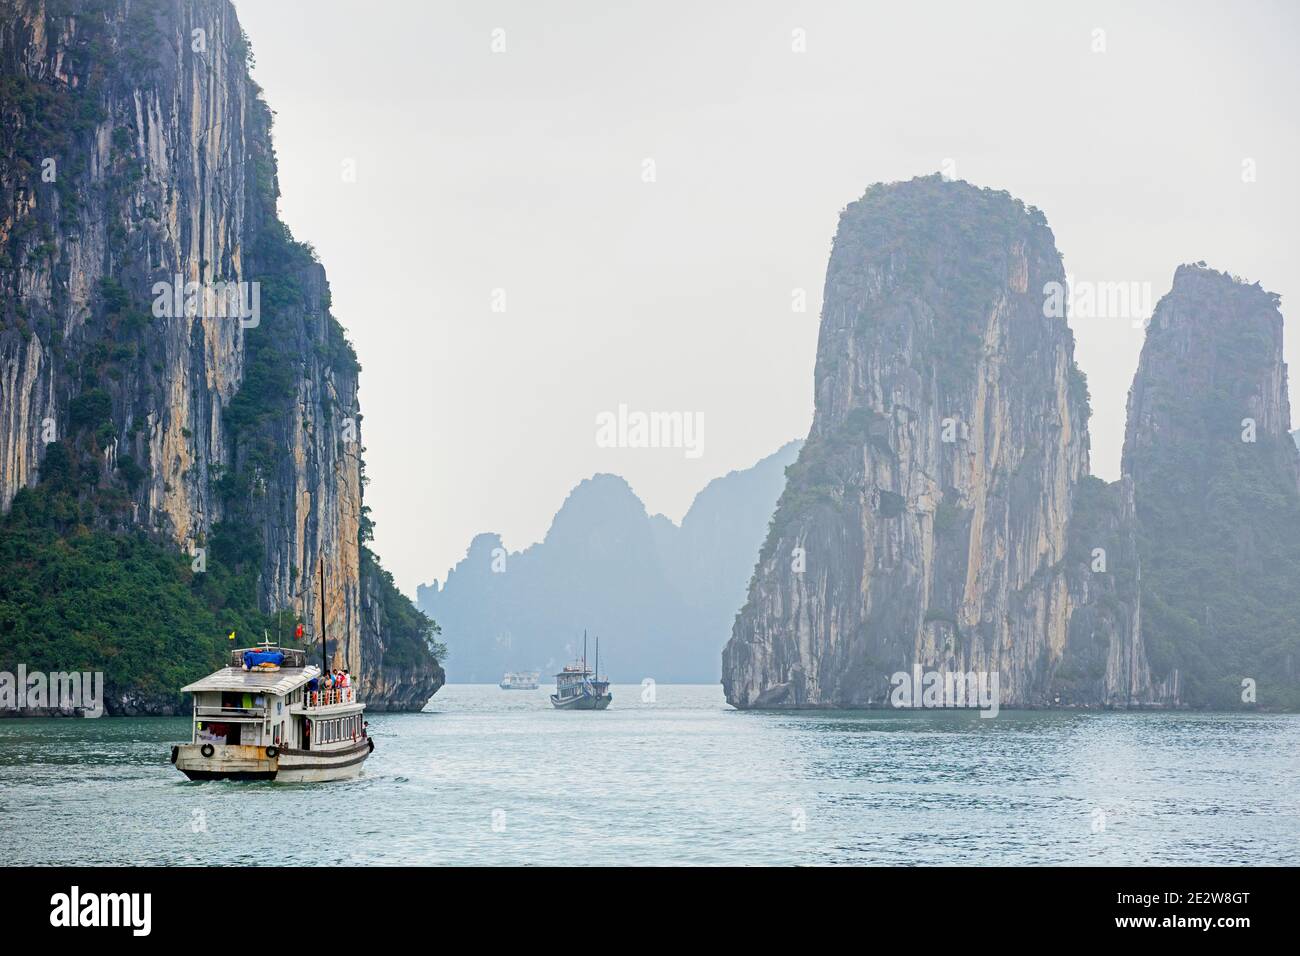 Tourist boats and limestone monolithic islands in Ha Long Bay / Halong Bay / Vinh Ha Long in the mist, Quang Ninh Province, Vietnam Stock Photo